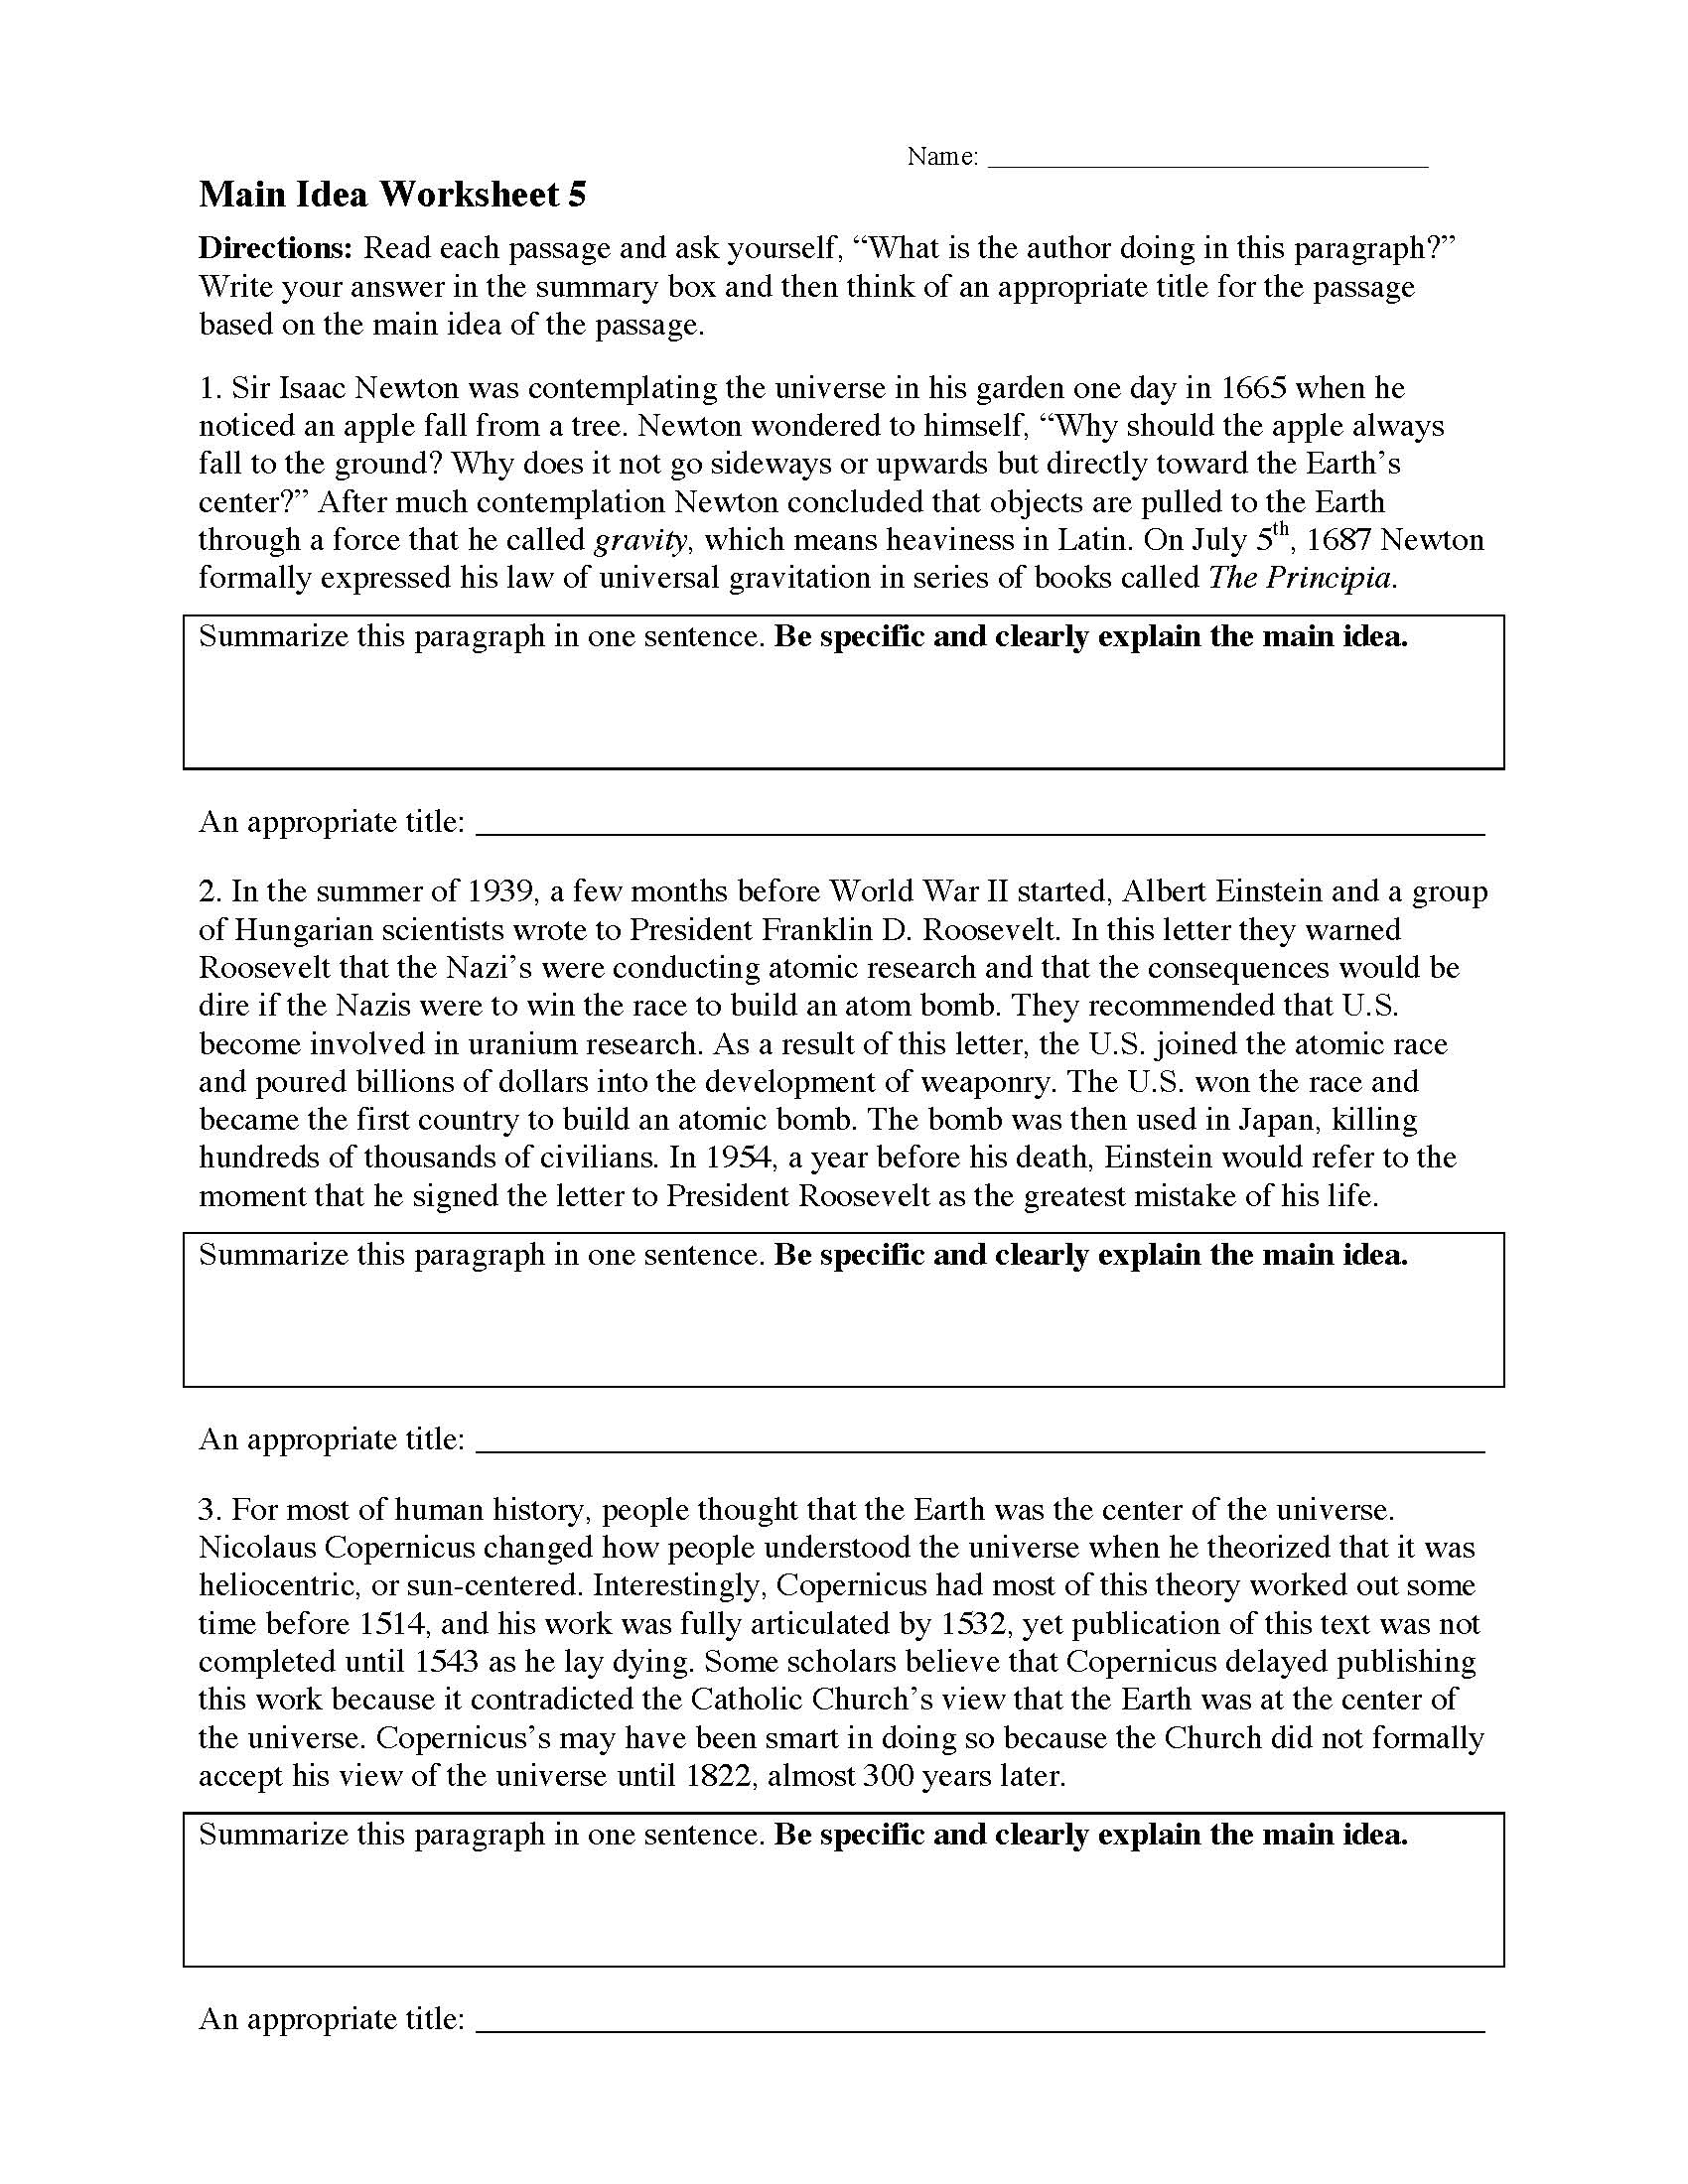 This is a preview image of Main Idea Worksheet 5. Click on it to enlarge it or view the source file.